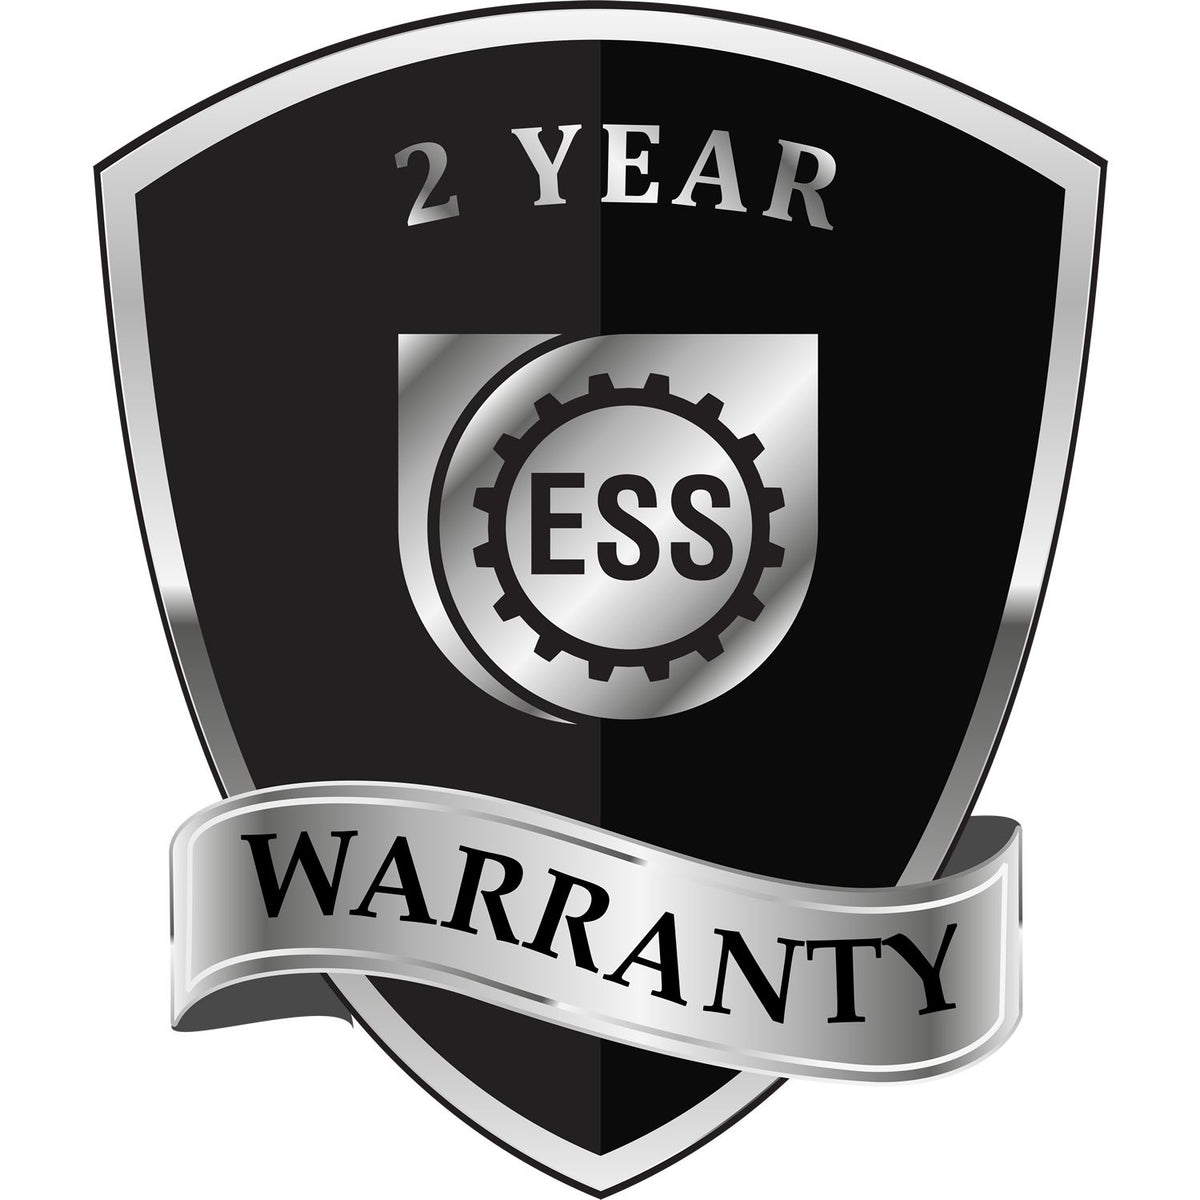 A black and silver badge or emblem showing warranty information for the Hybrid Minnesota Architect Seal